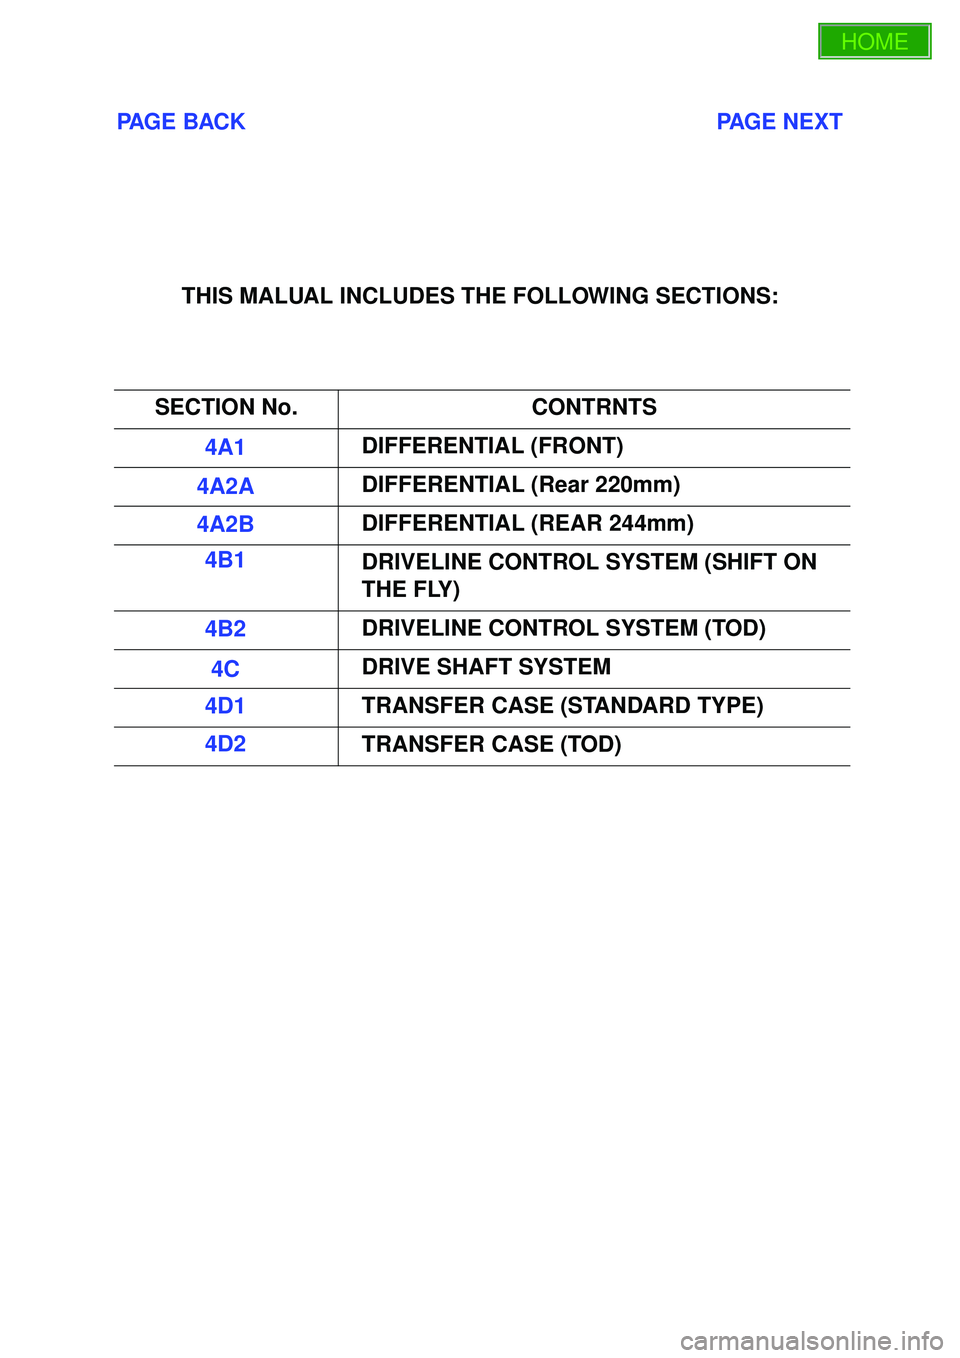 ISUZU TROOPER 1998  Service Repair Manual PAGE BACK                                                                           PAGE NEXT
THIS MALUAL INCLUDES THE FOLLOWING SECTIONS:
SECTION No. CONTRNTS
4A1 DIFFERENTIAL (FRONT)
4A2A DIFFERENTI